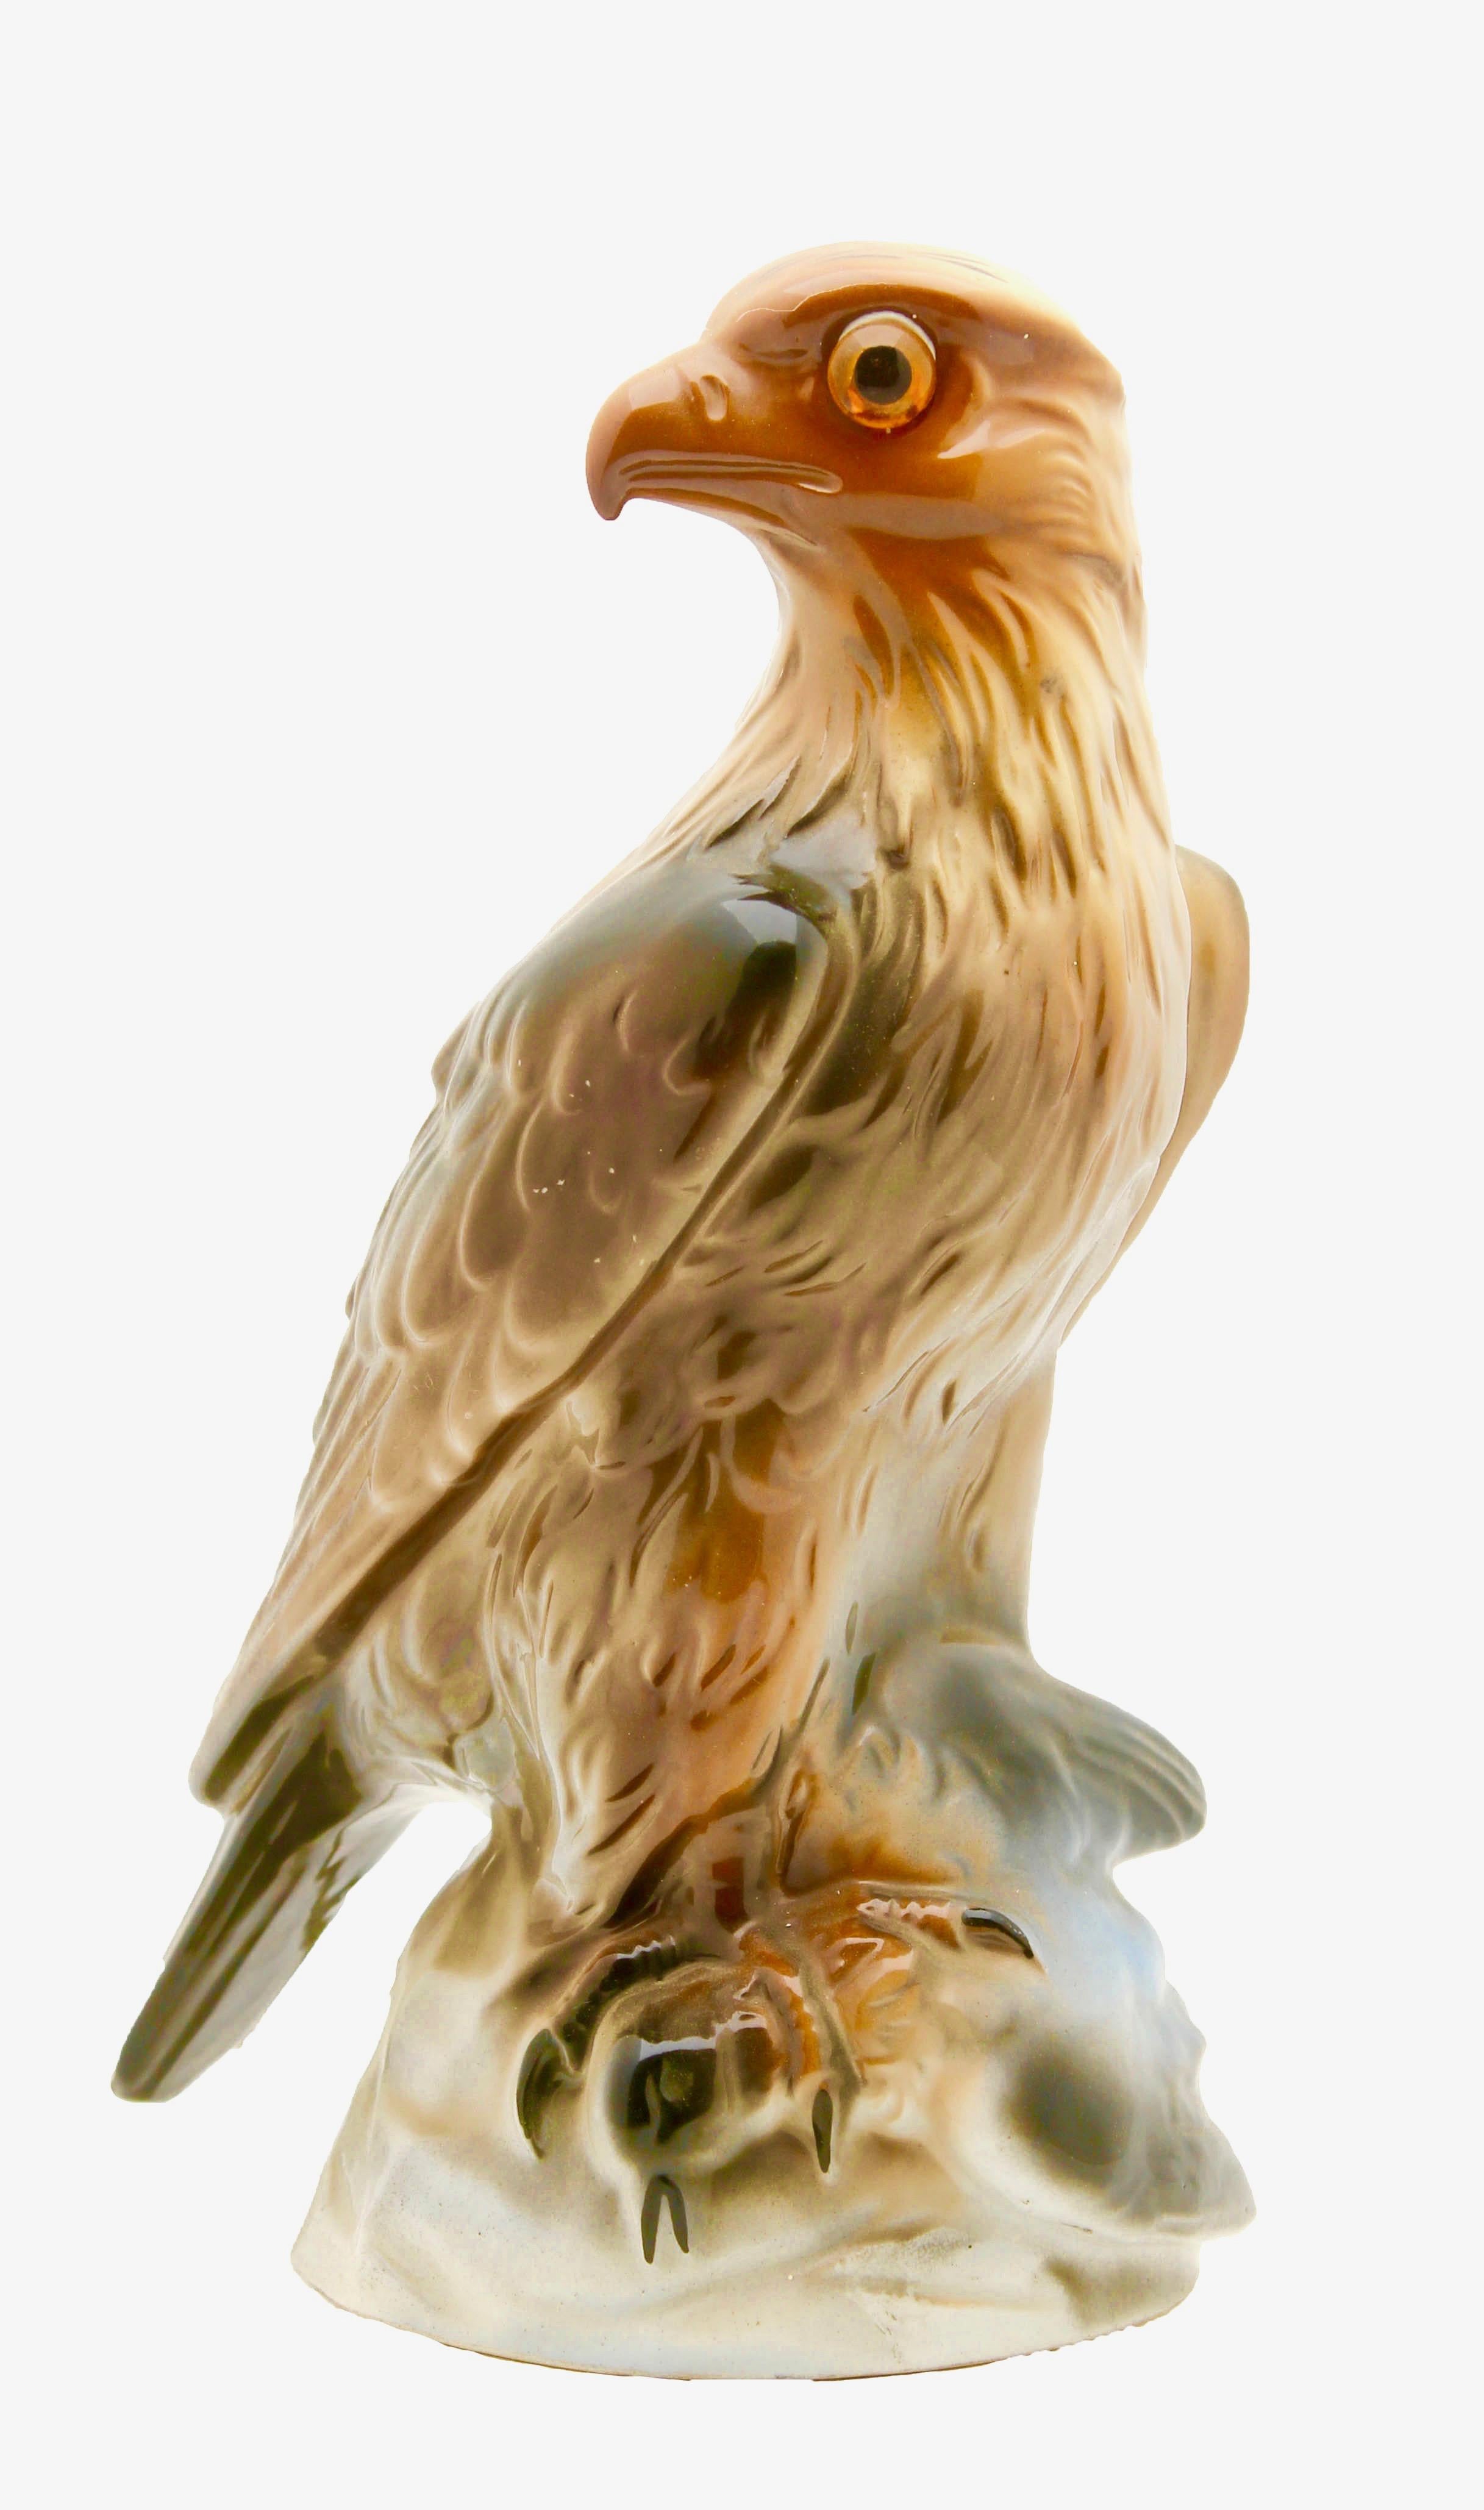 Rare and gorgeous eagle perfume lamp attributed to Carl Scheidig Grafenthal, Germany.
Excellent condition, lamp is in working order.
Size: Height 28 cm, 11 in. width 16 cm, 6.29 in.
Germany, 1930s, excellent condition
Porcelain figurine/air